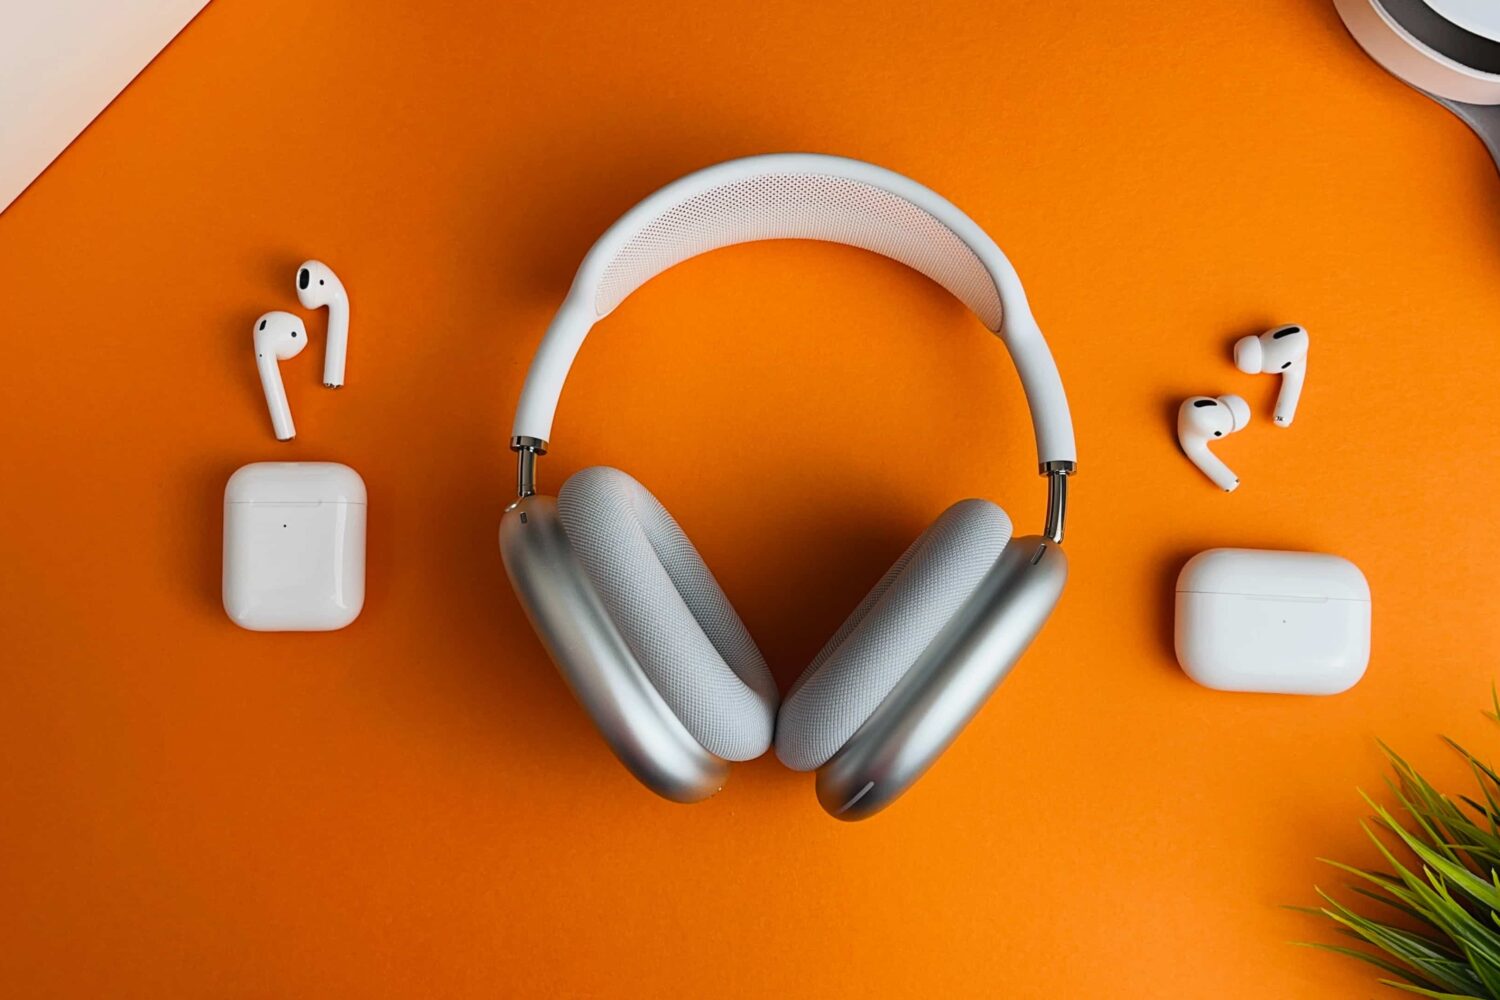 AirPods Max, the original AirPods and the first AirPods Pro laid flat on an orange table